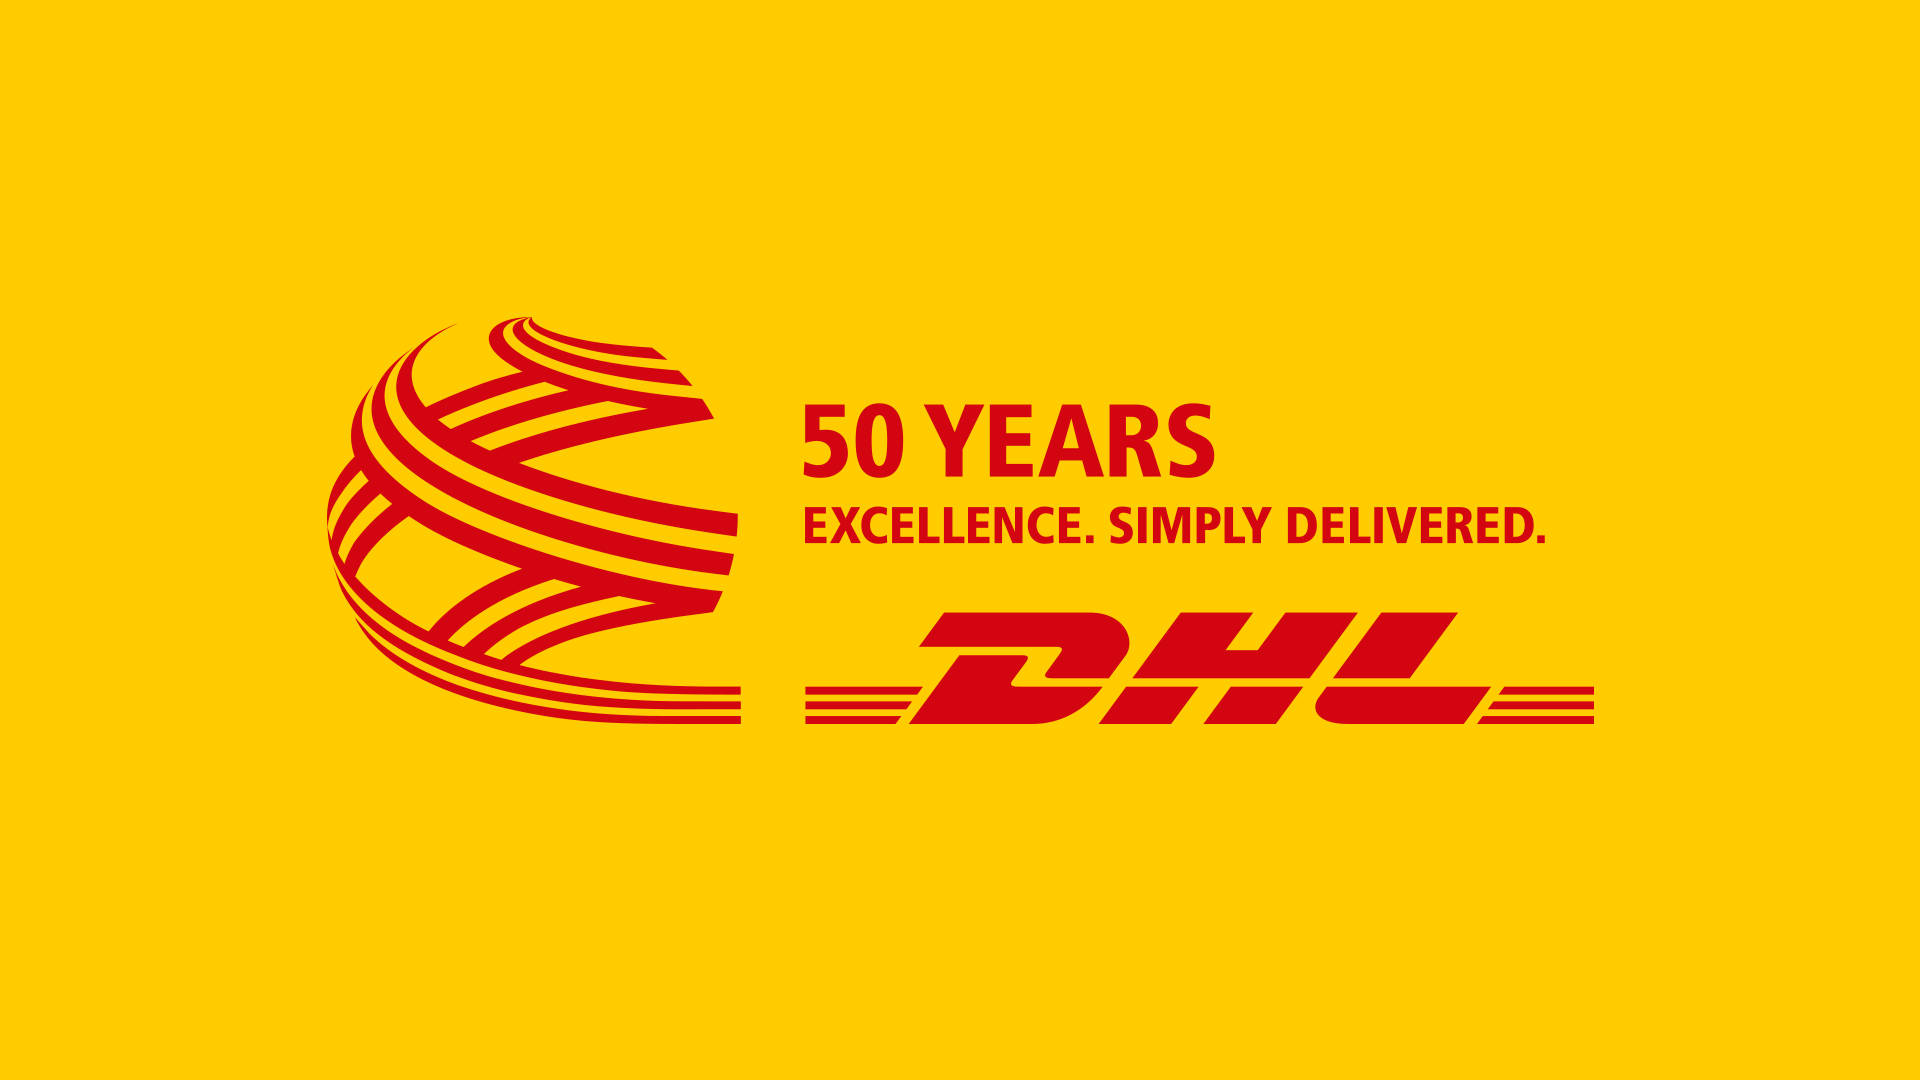 Dhl Golden Years Poster Background